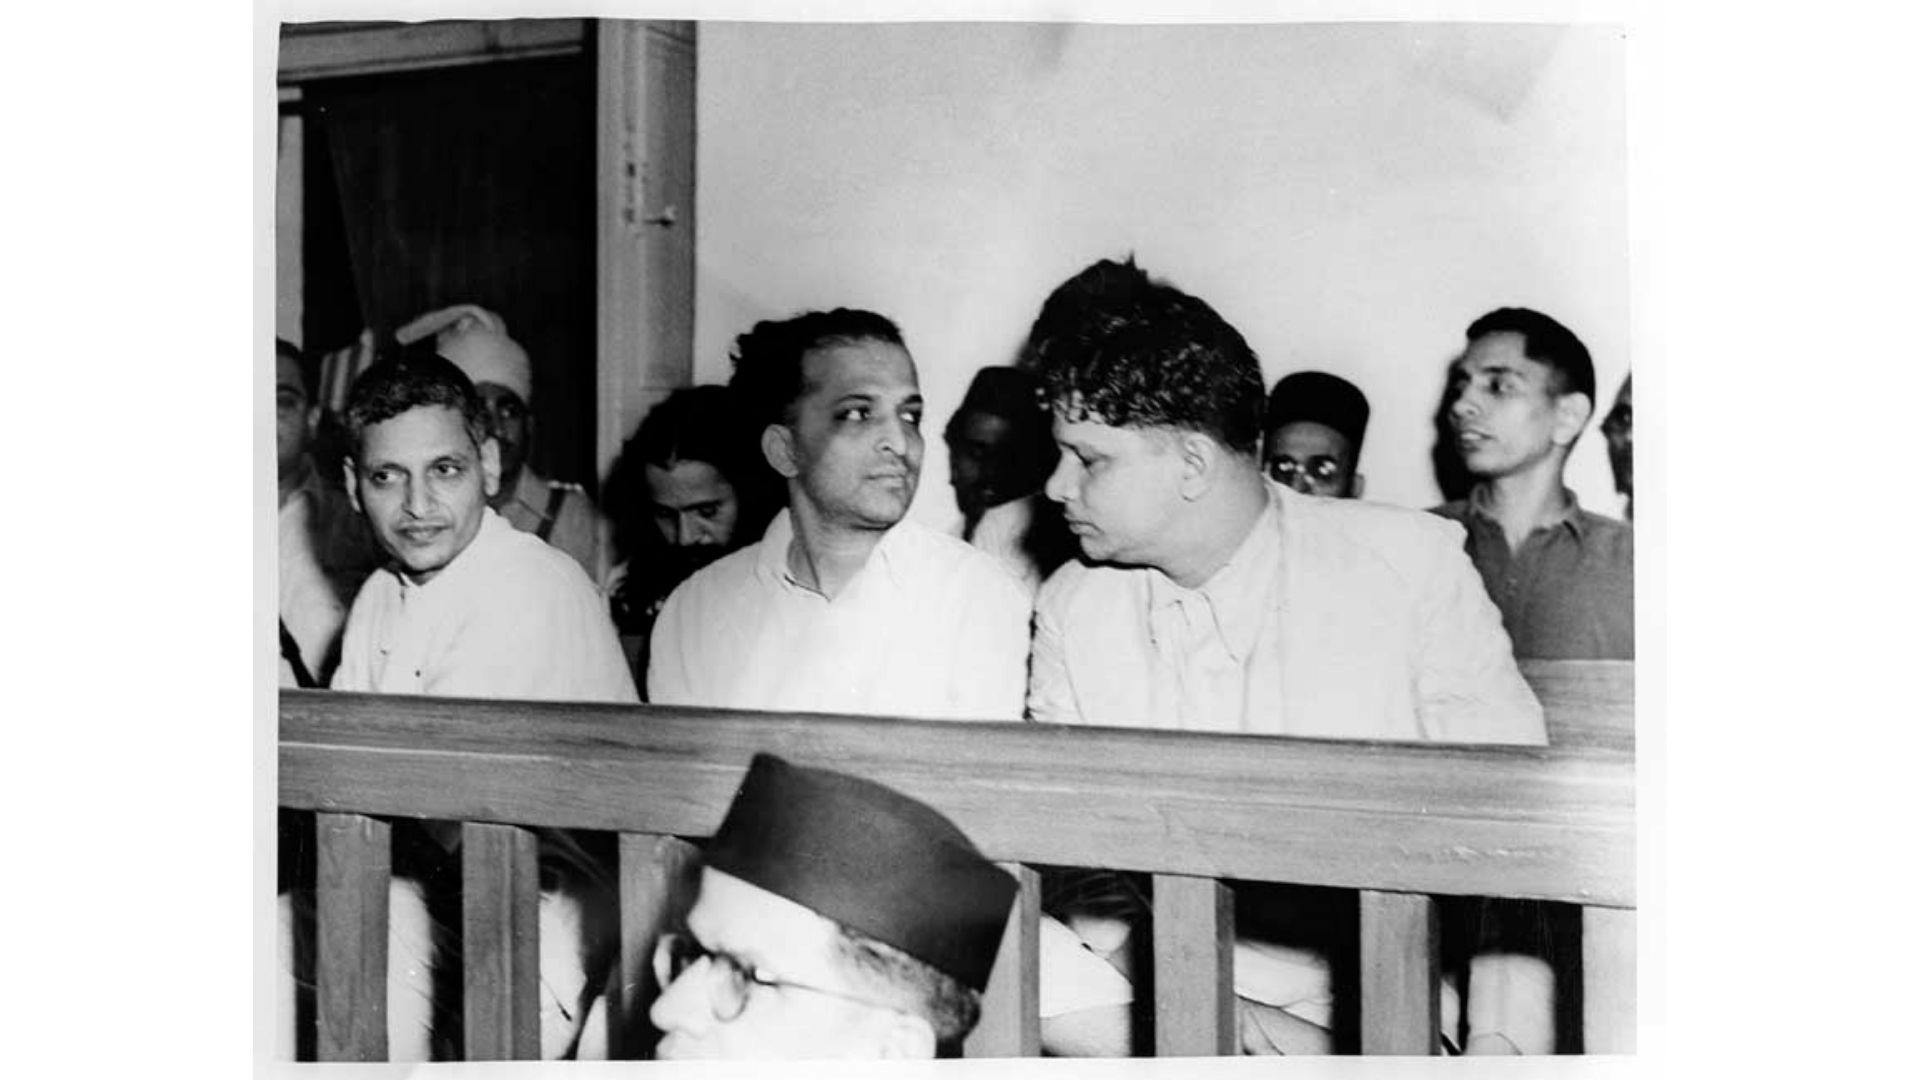 Trial of persons accused of participation and complicity in Gandhi's assassination | Wikimedia Commons